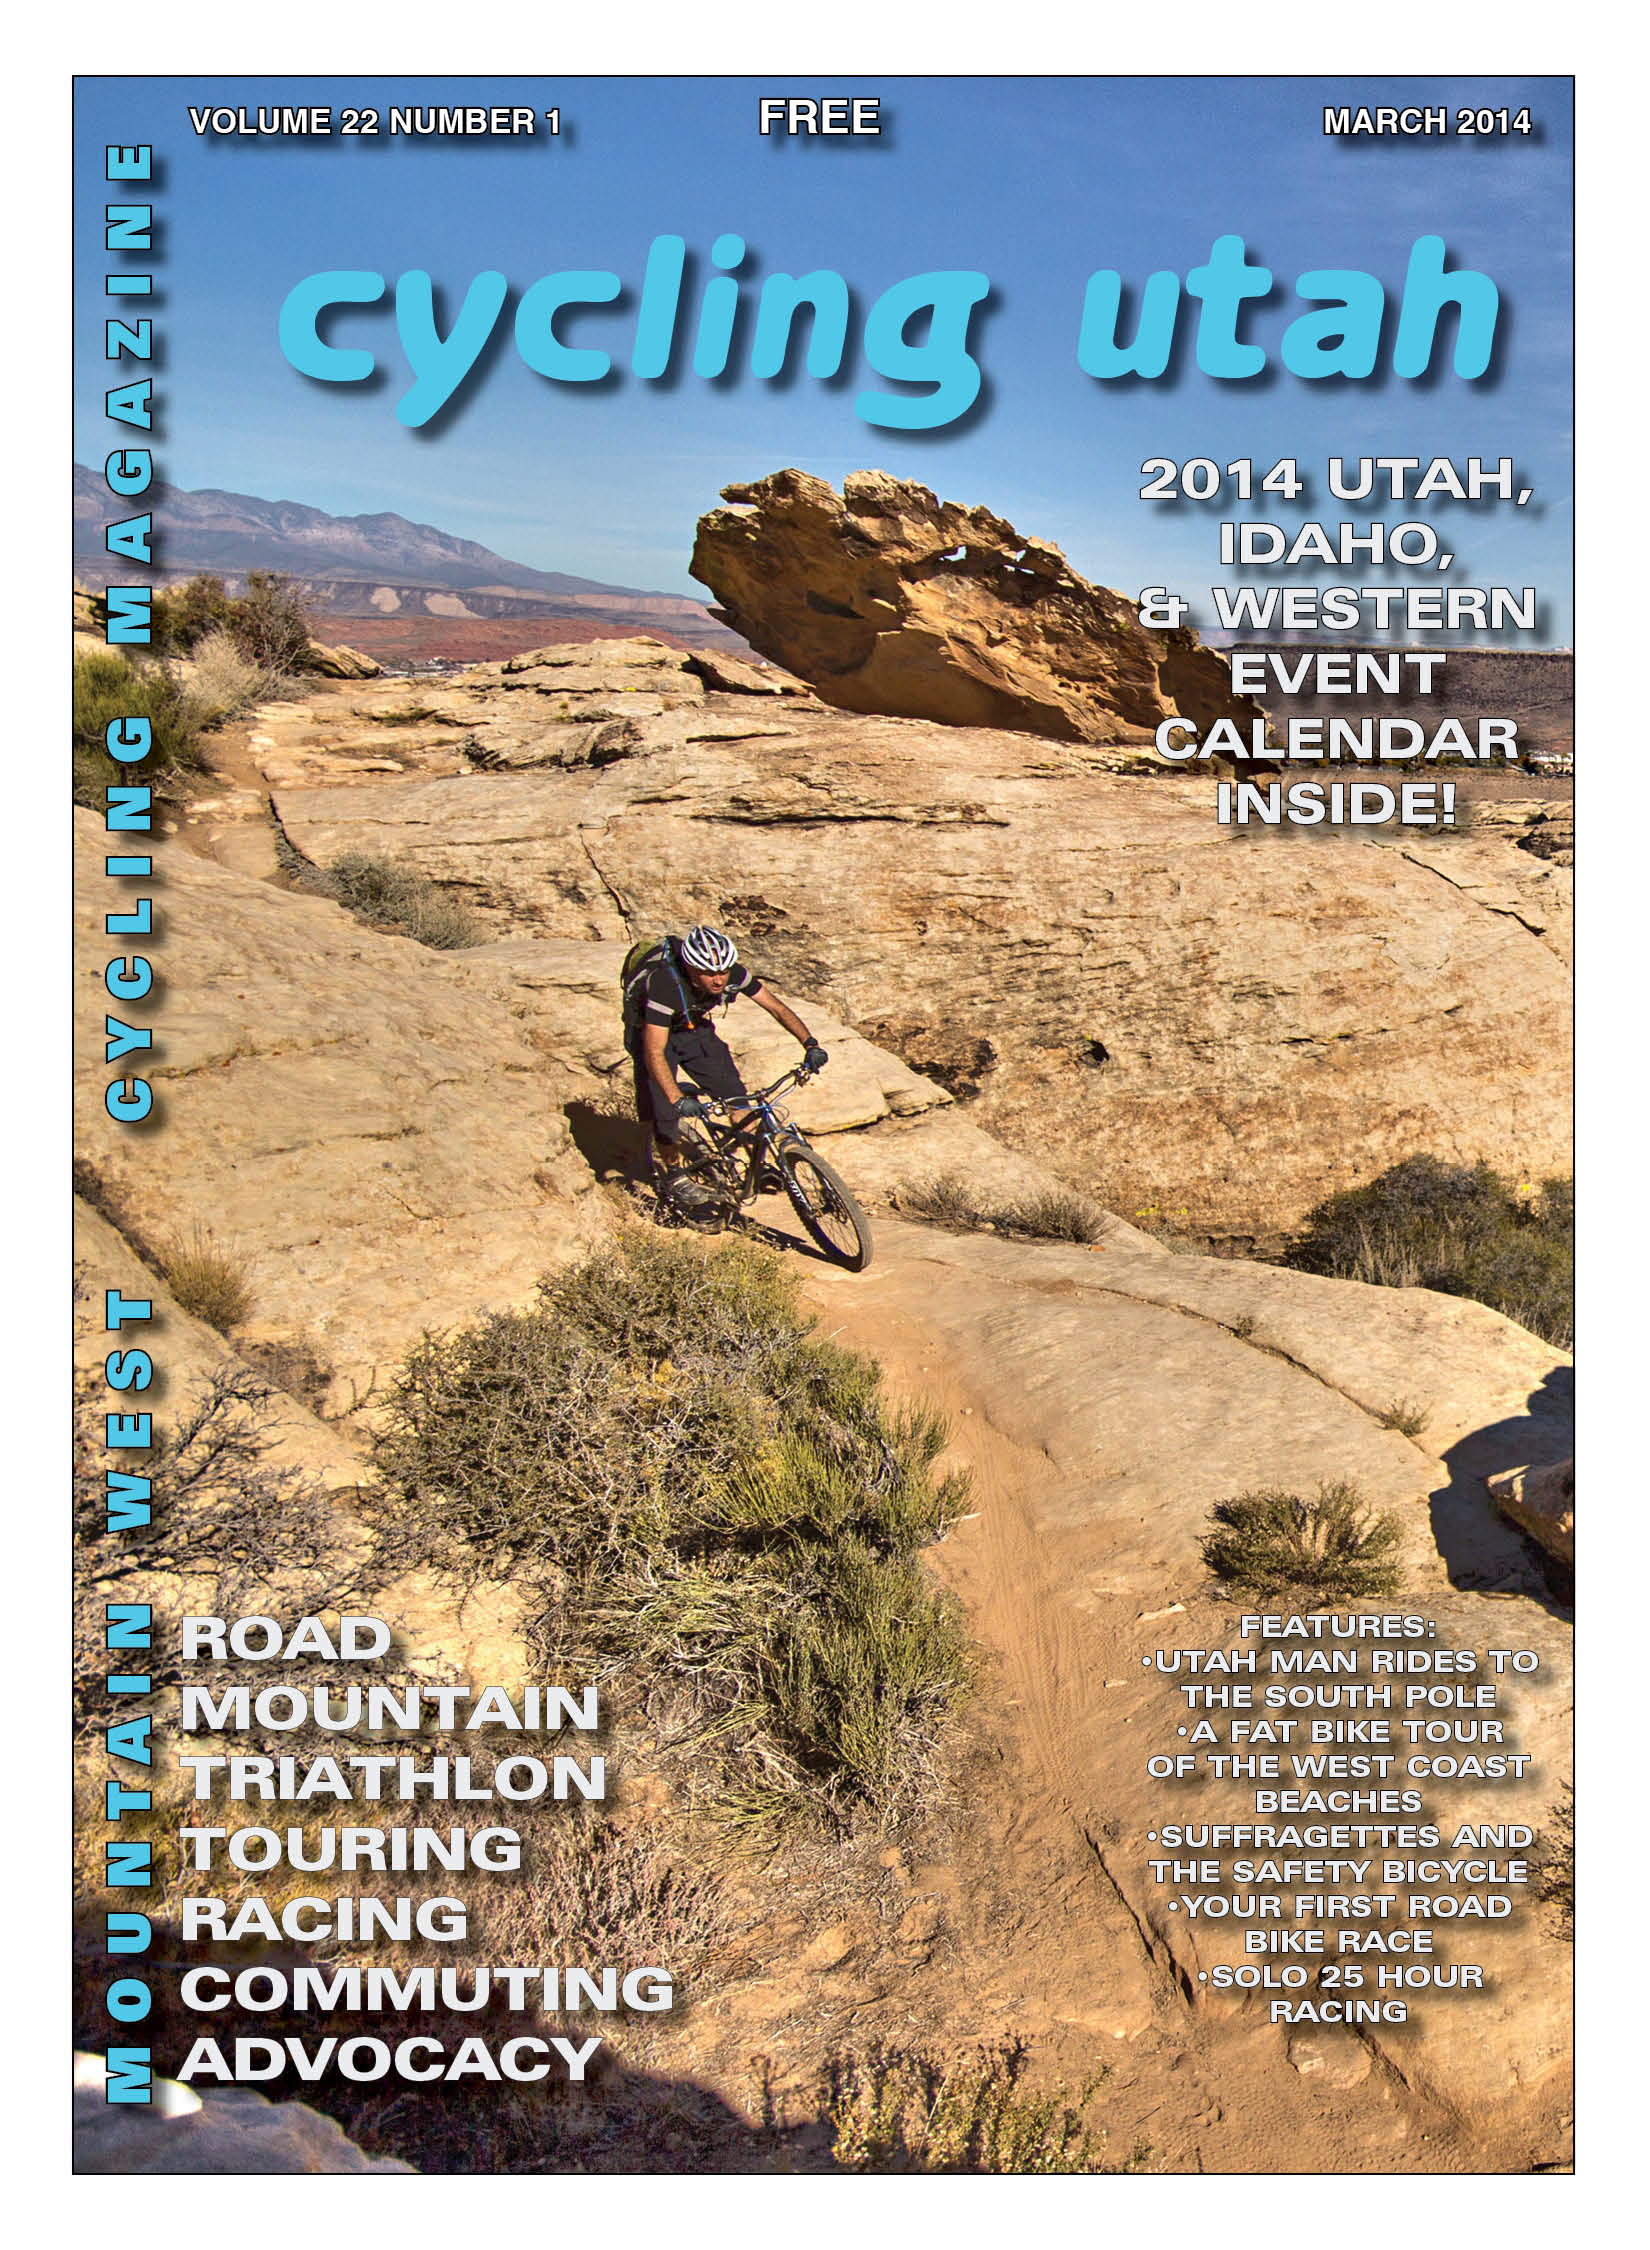 Cycling Utah’s March 2014 Issue is Now Available!